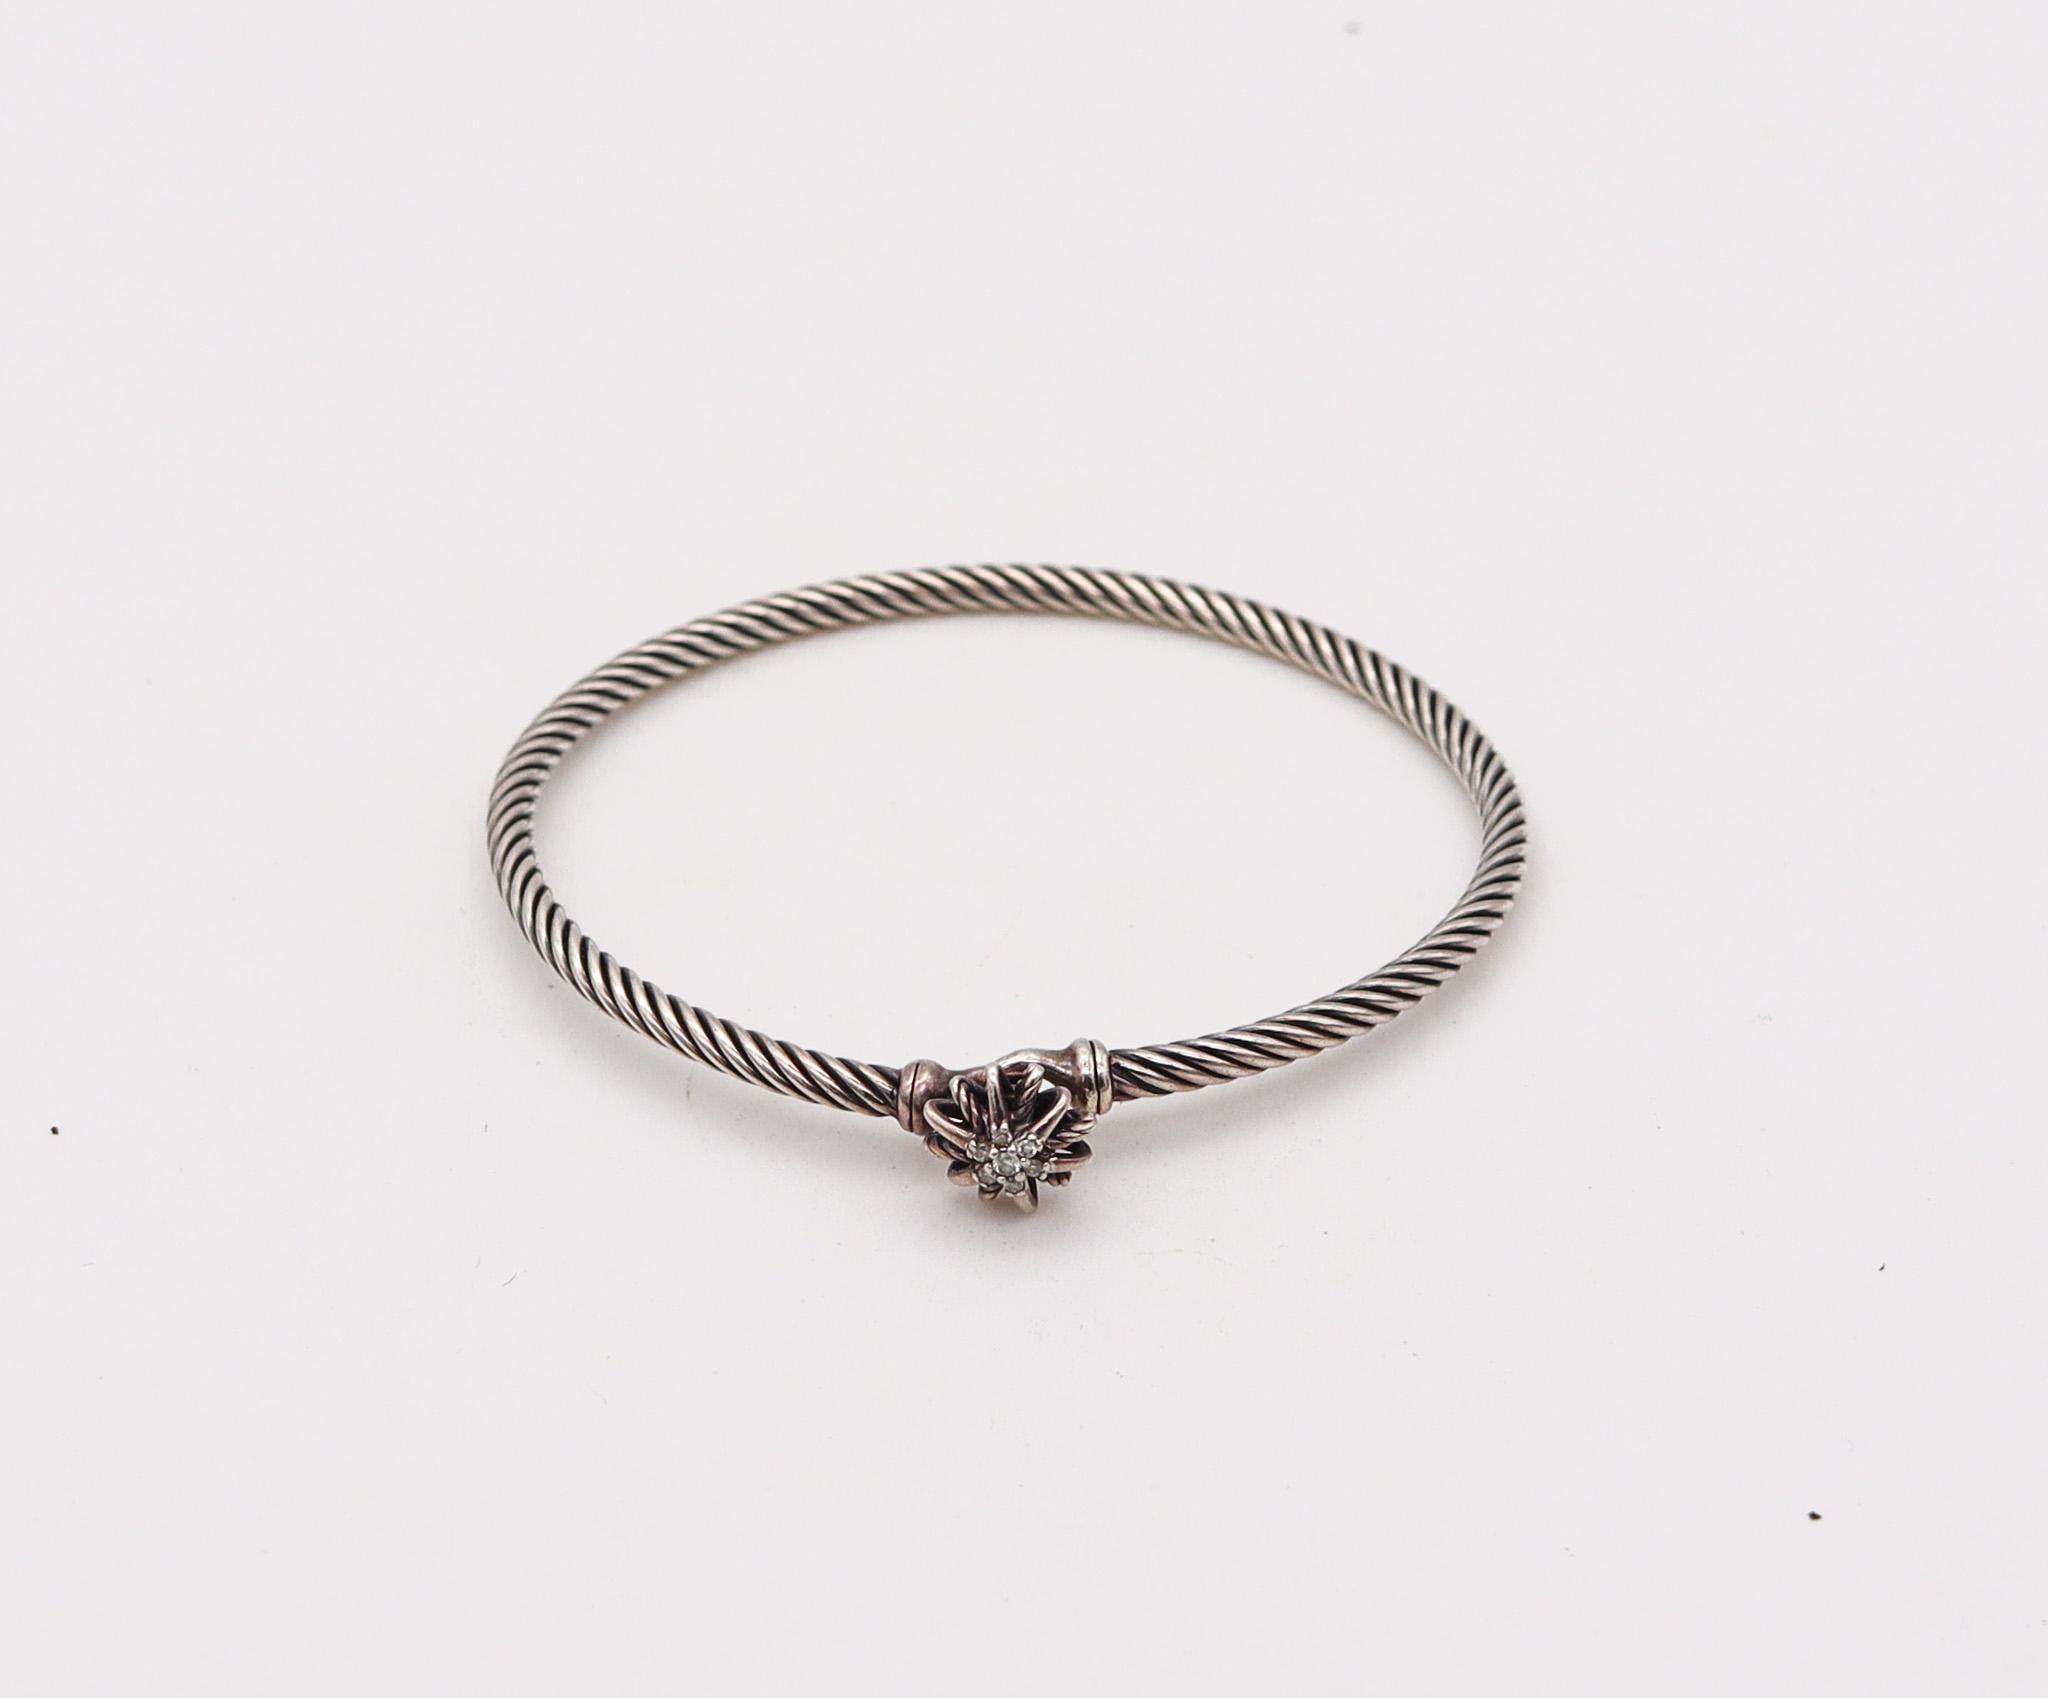 Twisted bangle bracelet designed by David Yurman.

An iconic bangle bracelet from the starburst collection, created by David Yurman. It was crafted with twisted wires made up in solid .925/.999 sterling silver with a starburst in the center. Mounted